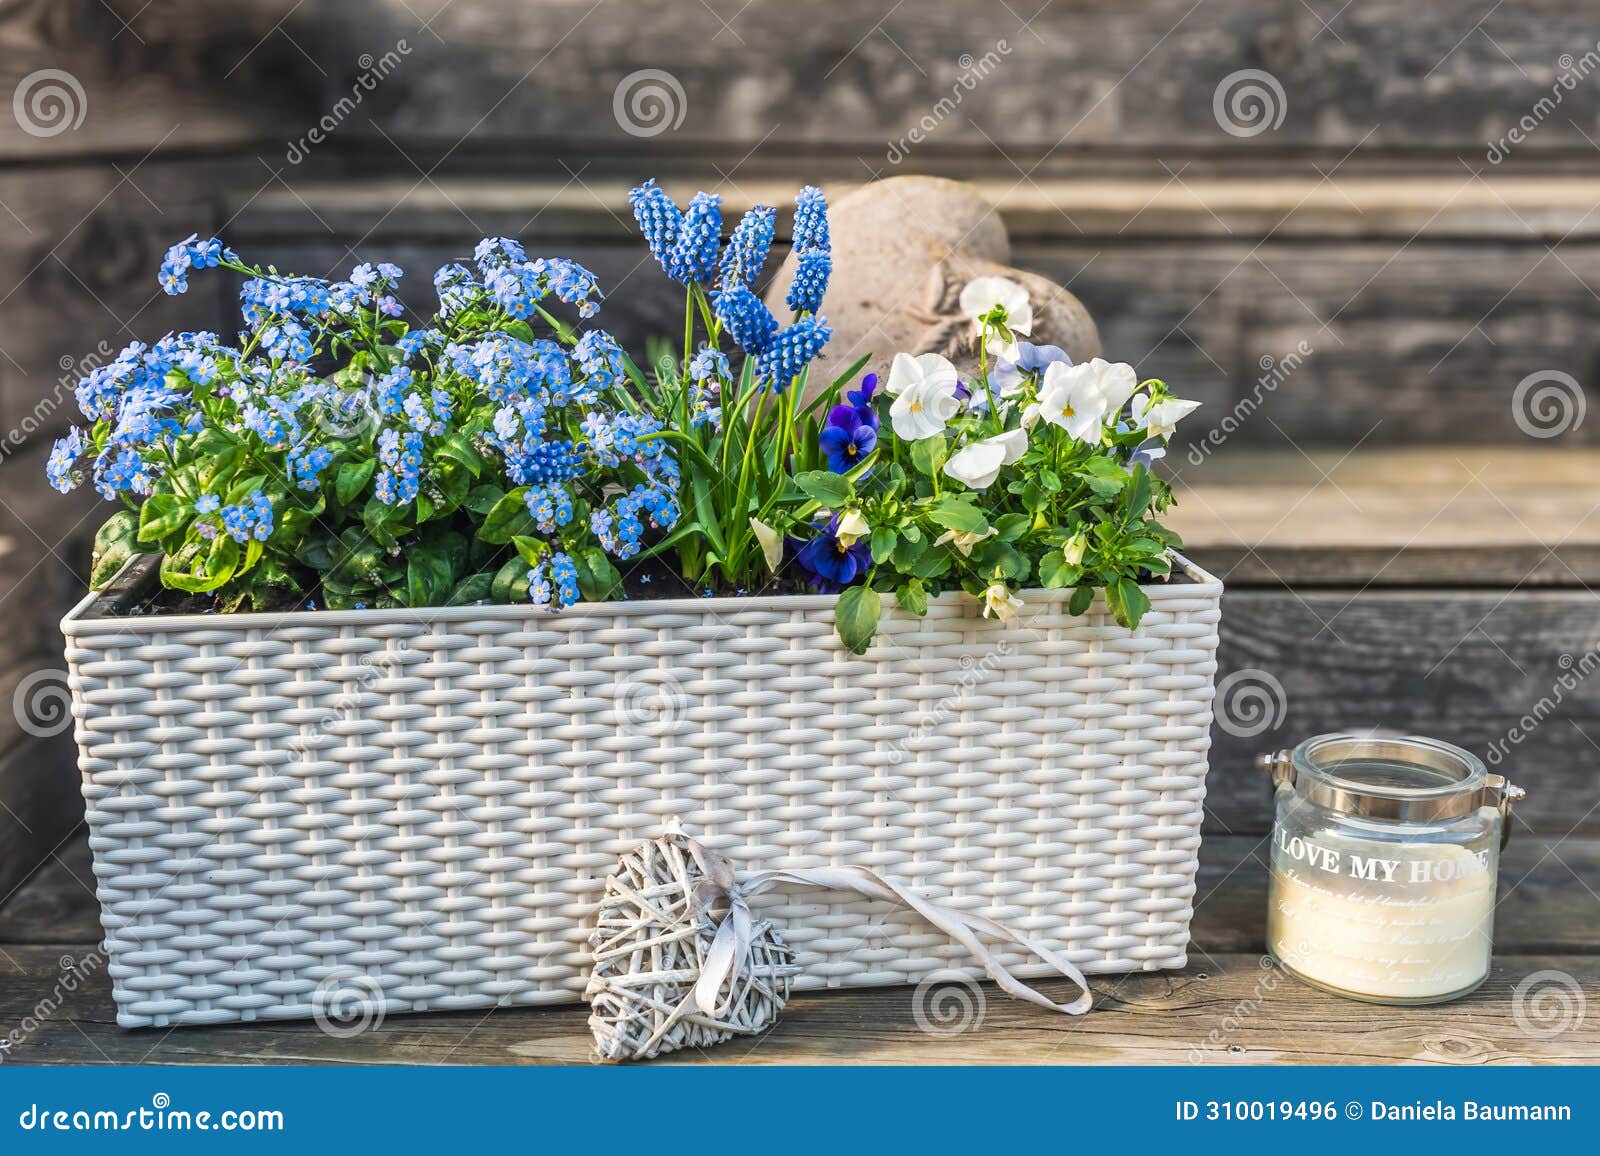 white flower box with blue forgetmenots, mini hyacinths and pansies on wooden background